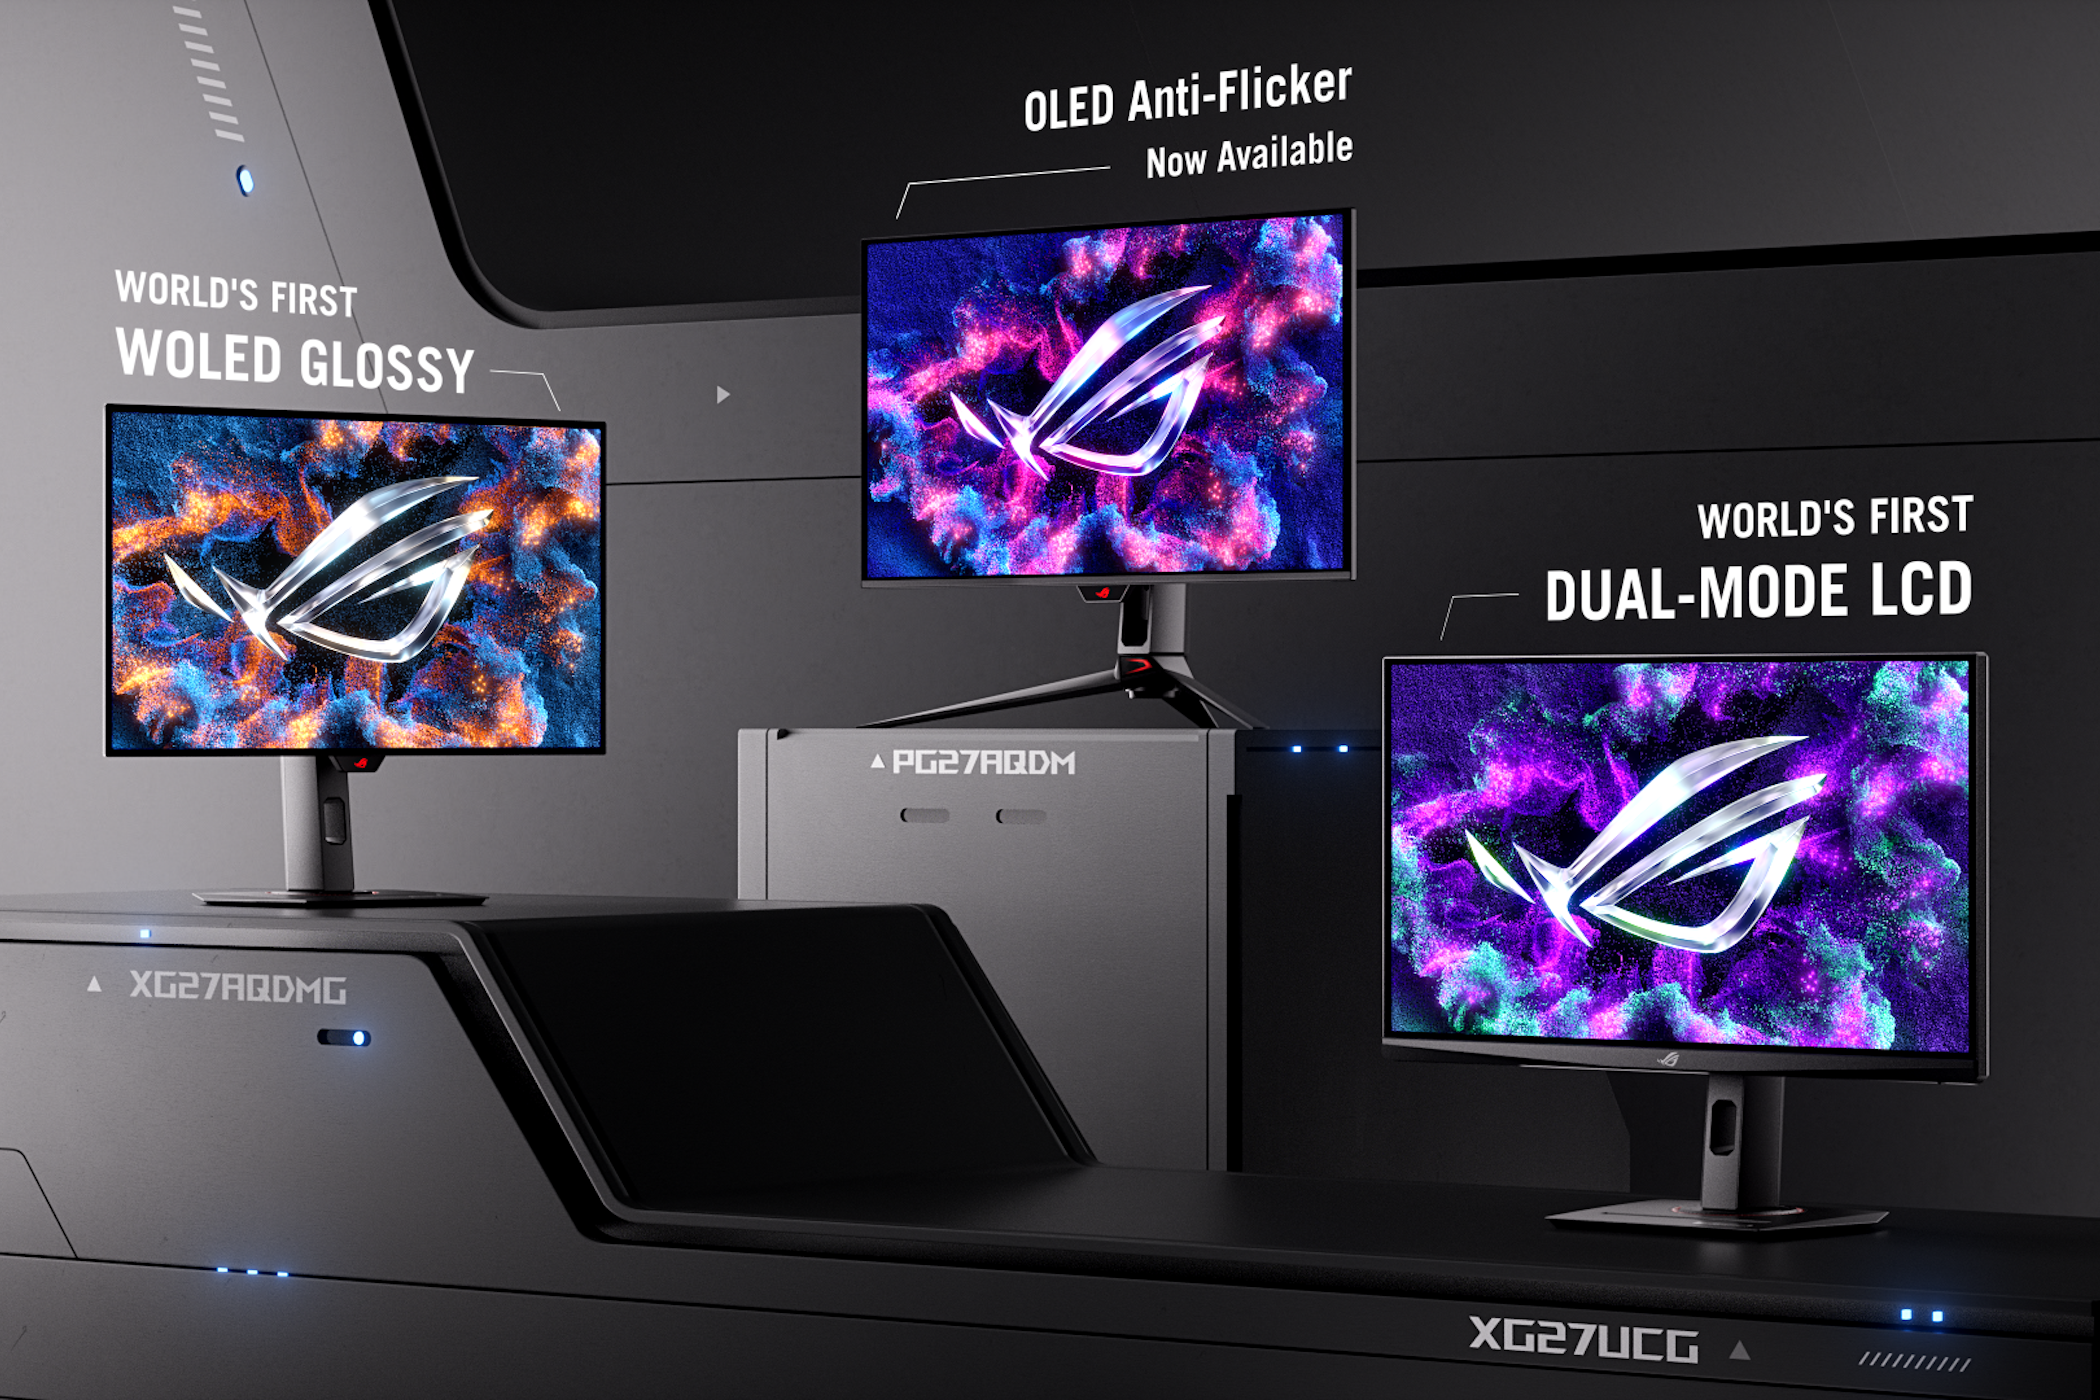 ROG's glossy OLED gaming monitor gives a crisper image like never before